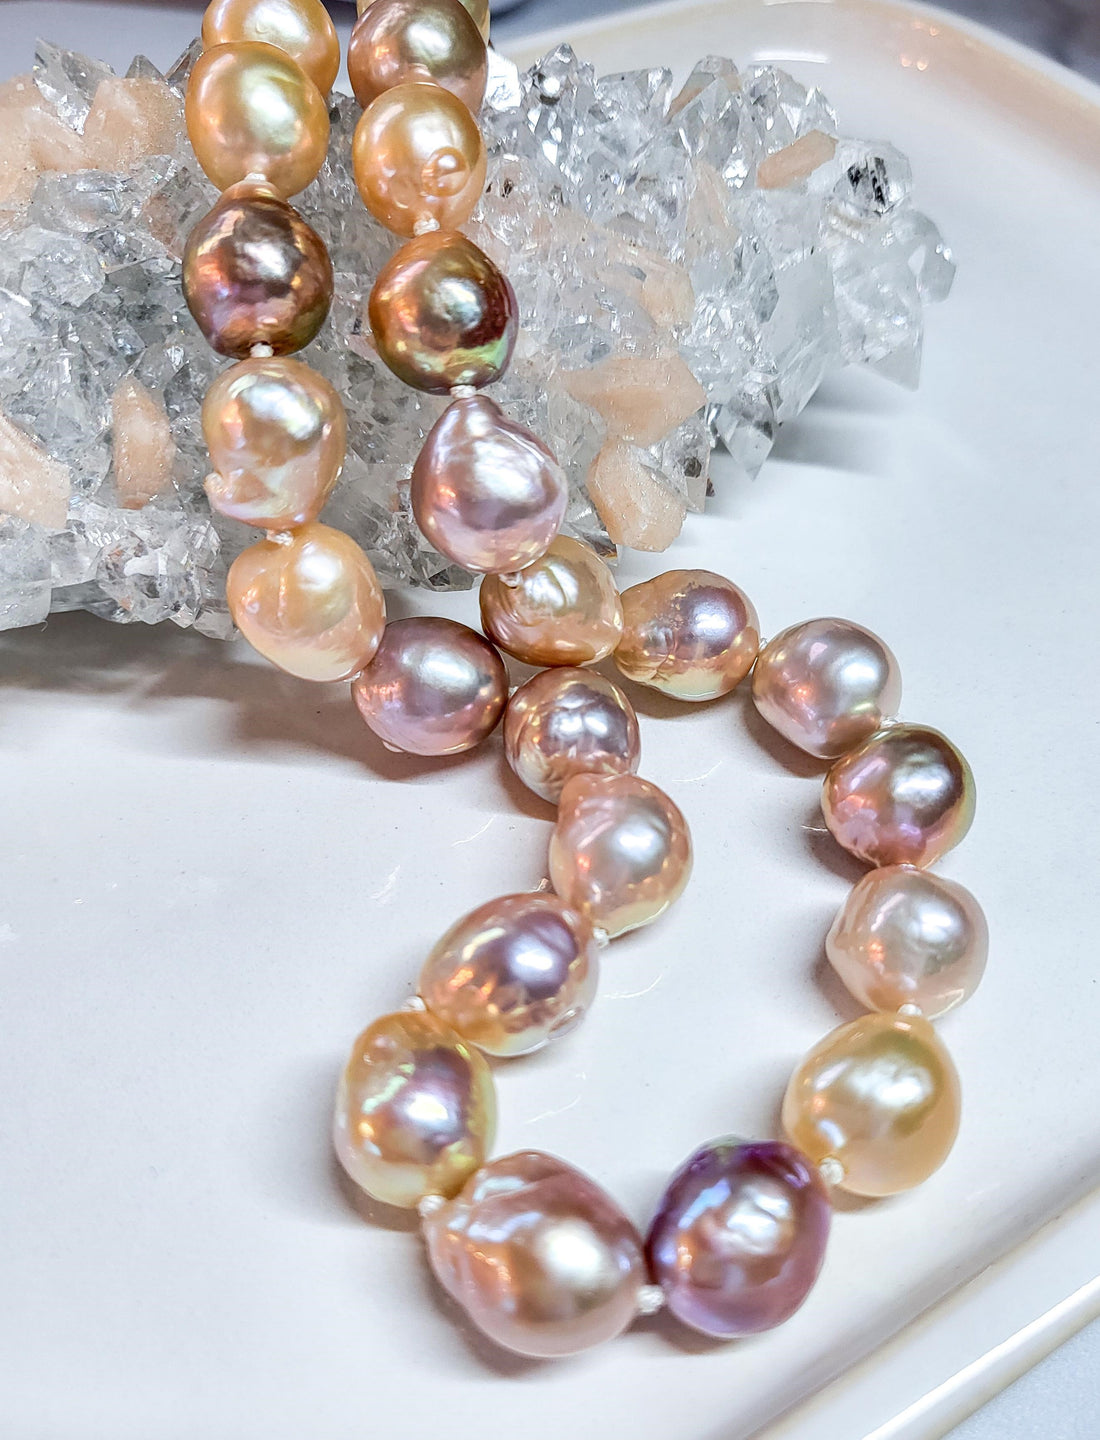 Pearls: More than just jewels